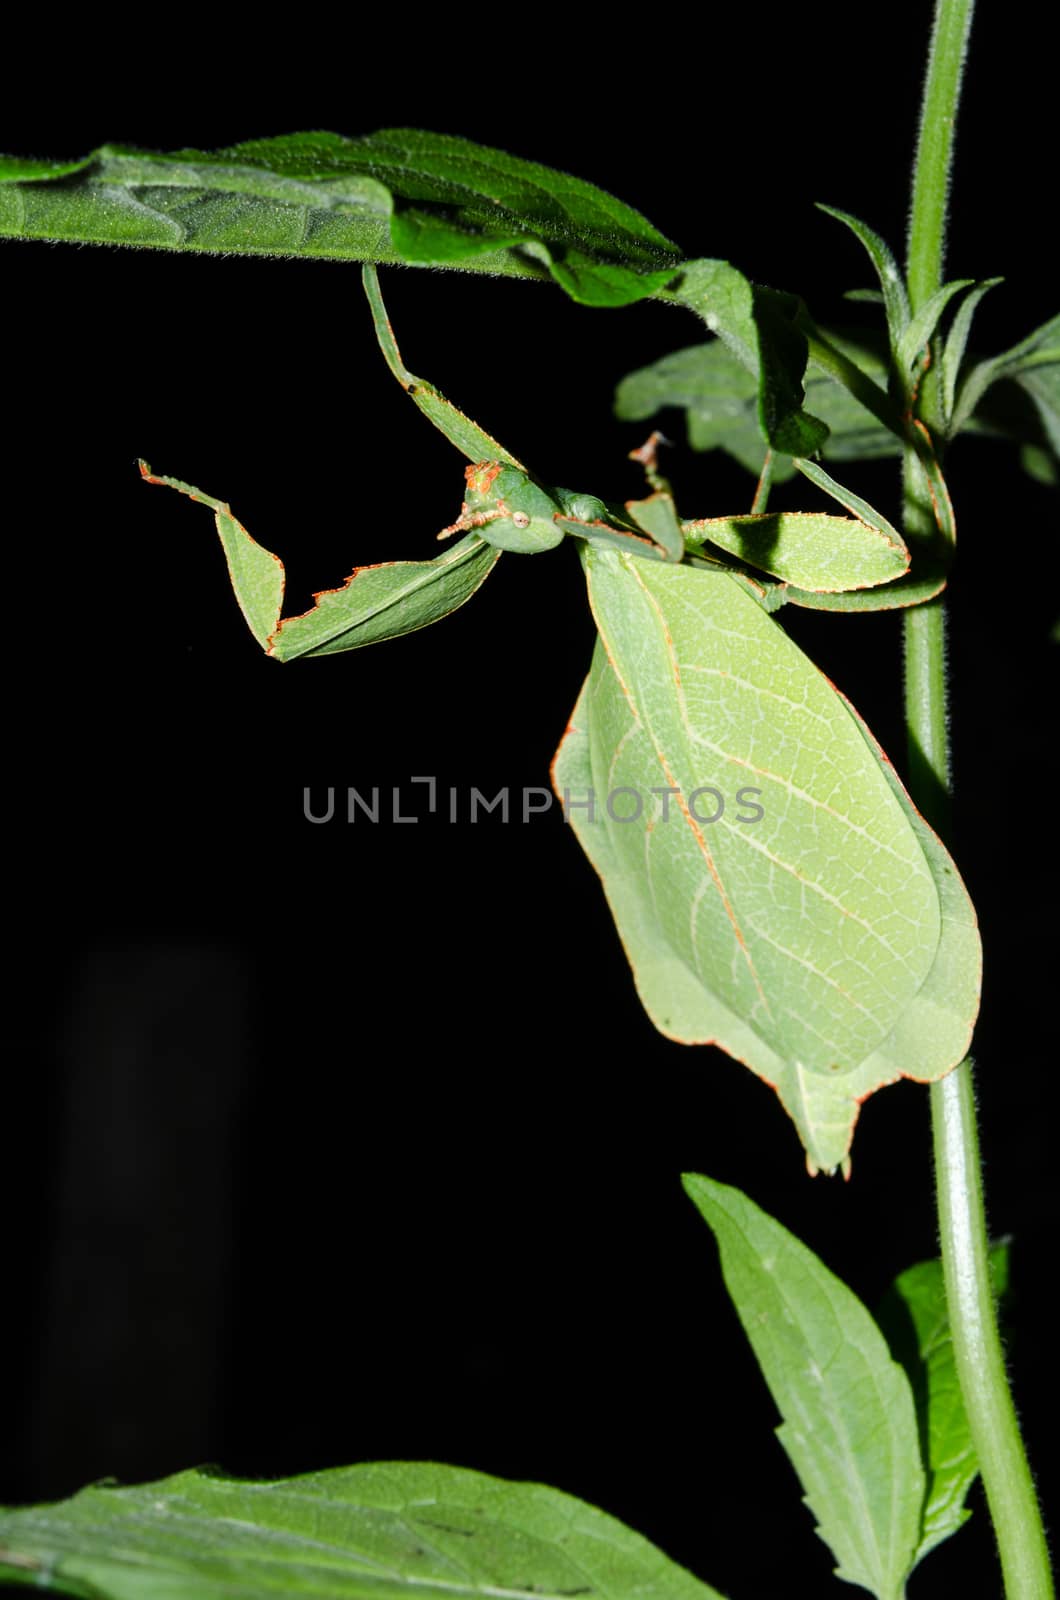 Phyllium bioculatum have extremely flattened, irregularly shaped bodies, wings, and legs.